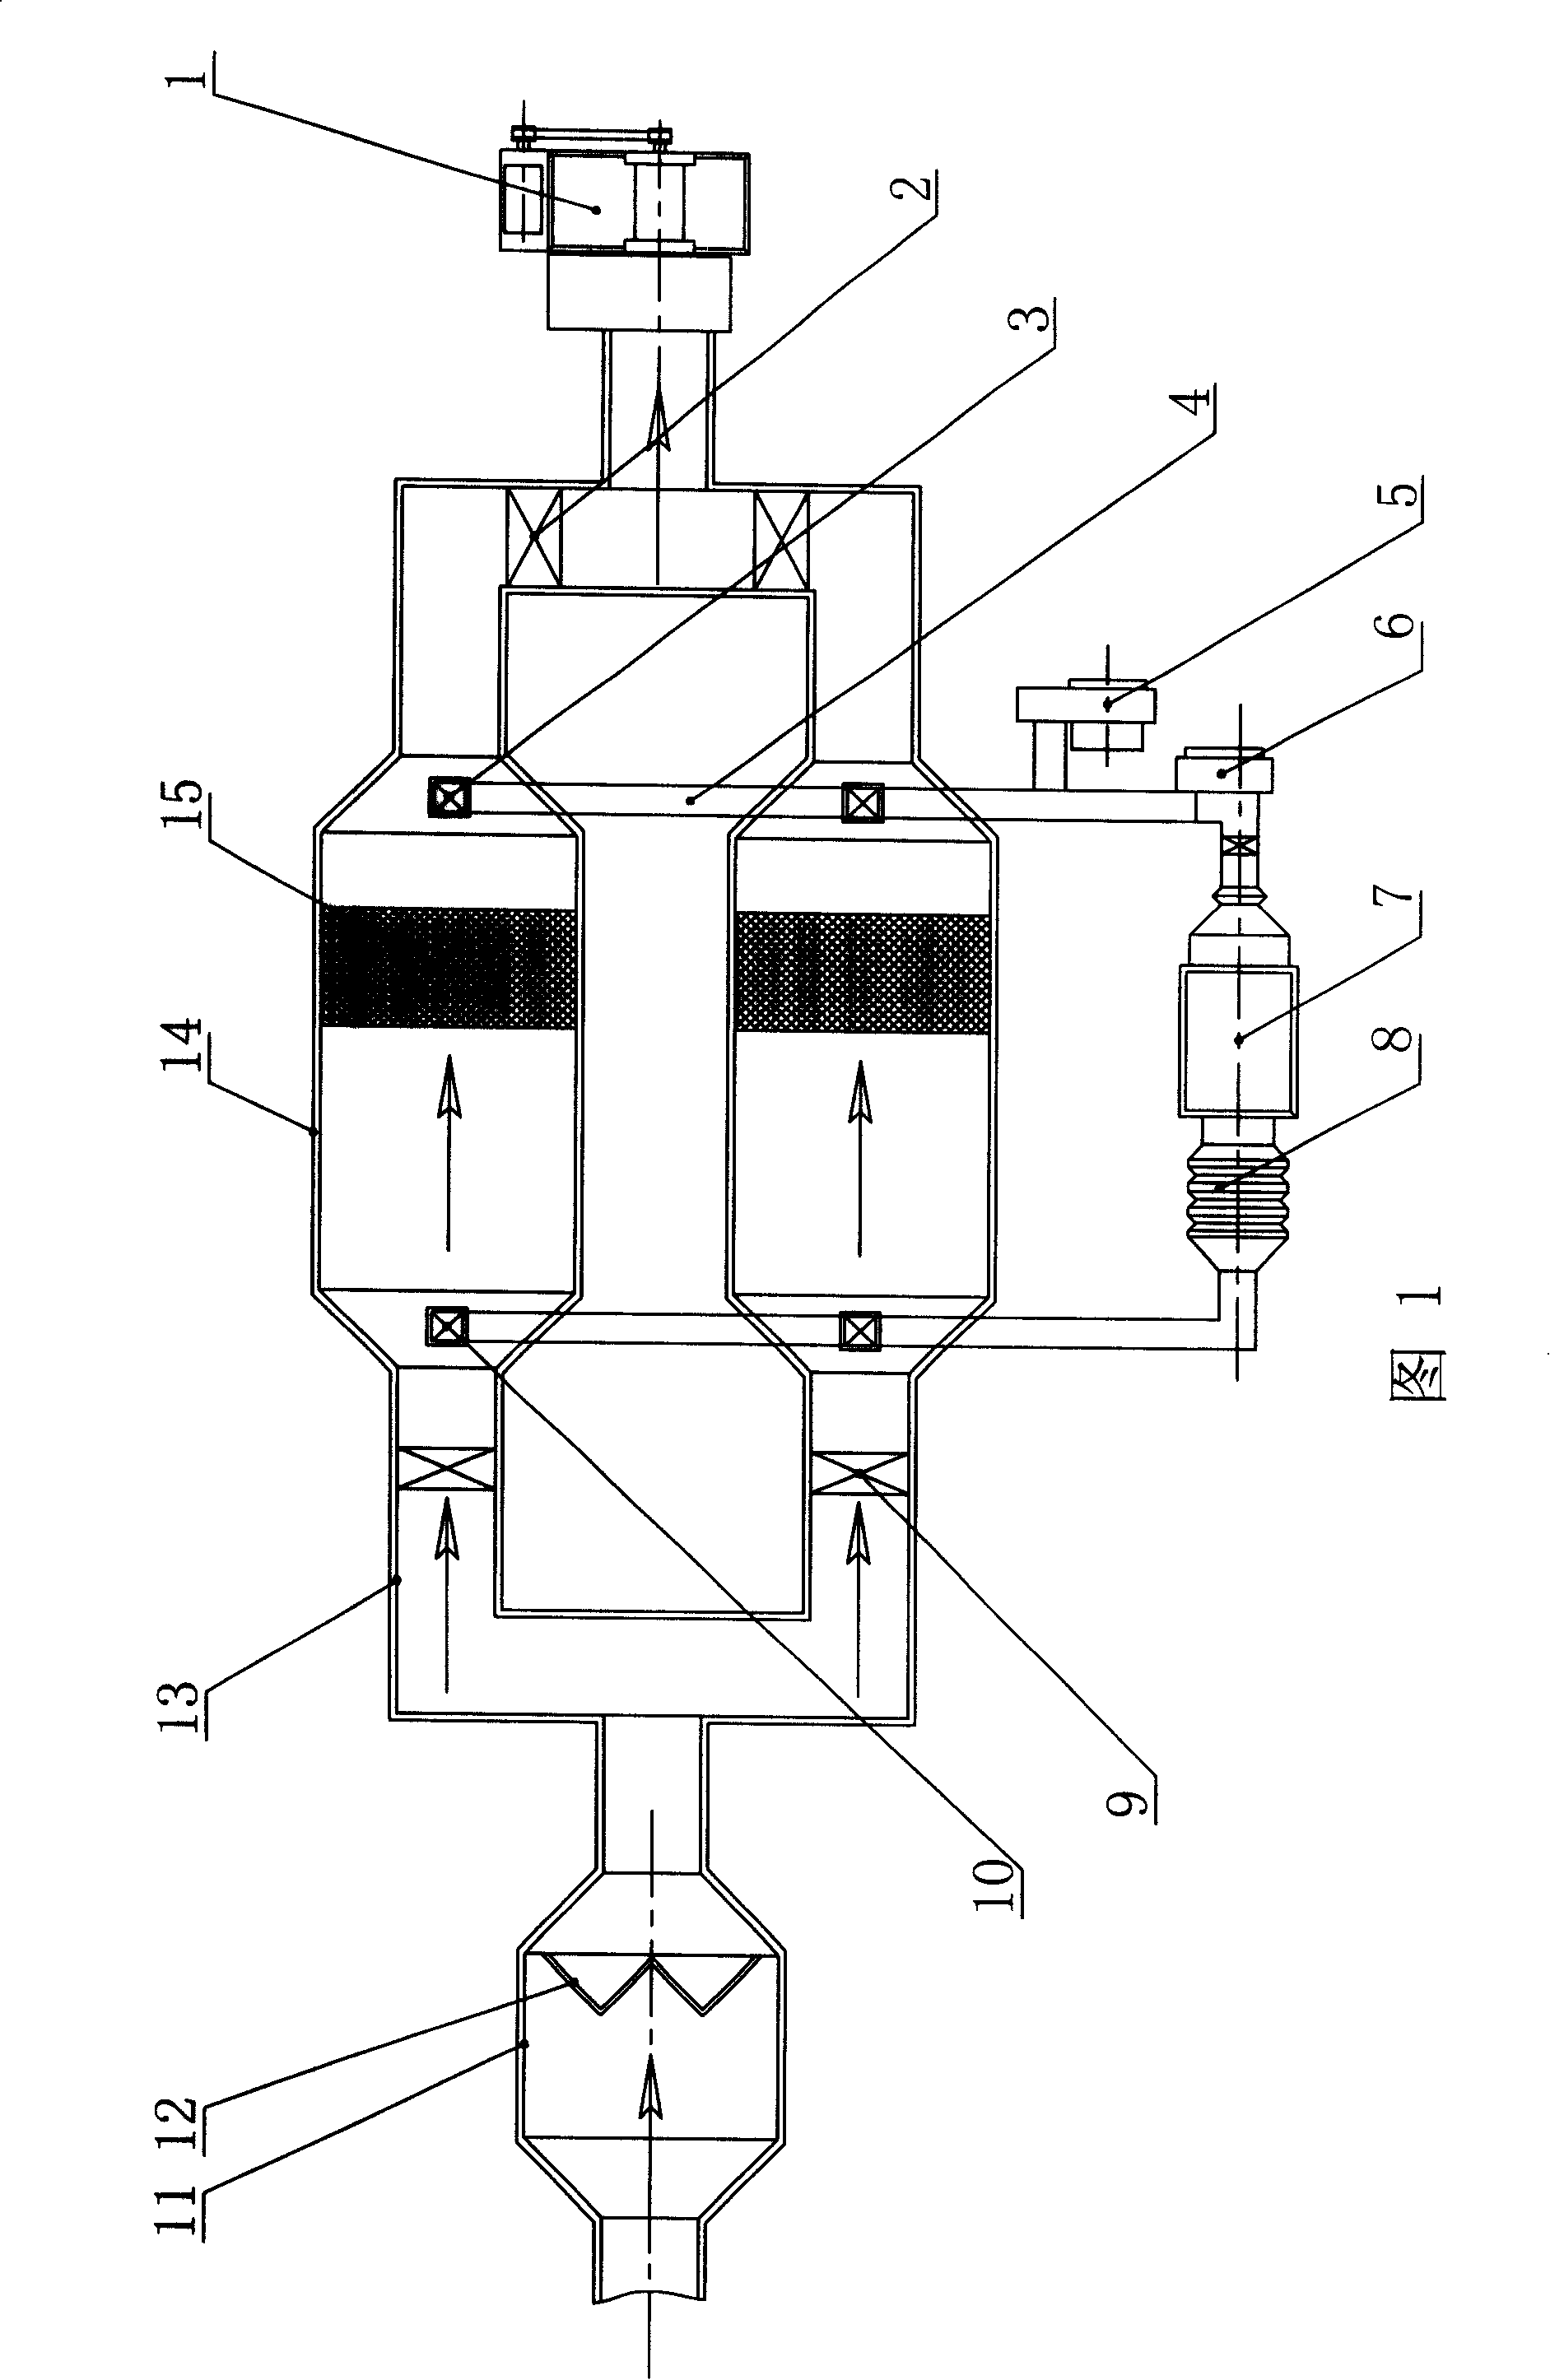 Device for adsorbing, desorbing and purifying organic gas